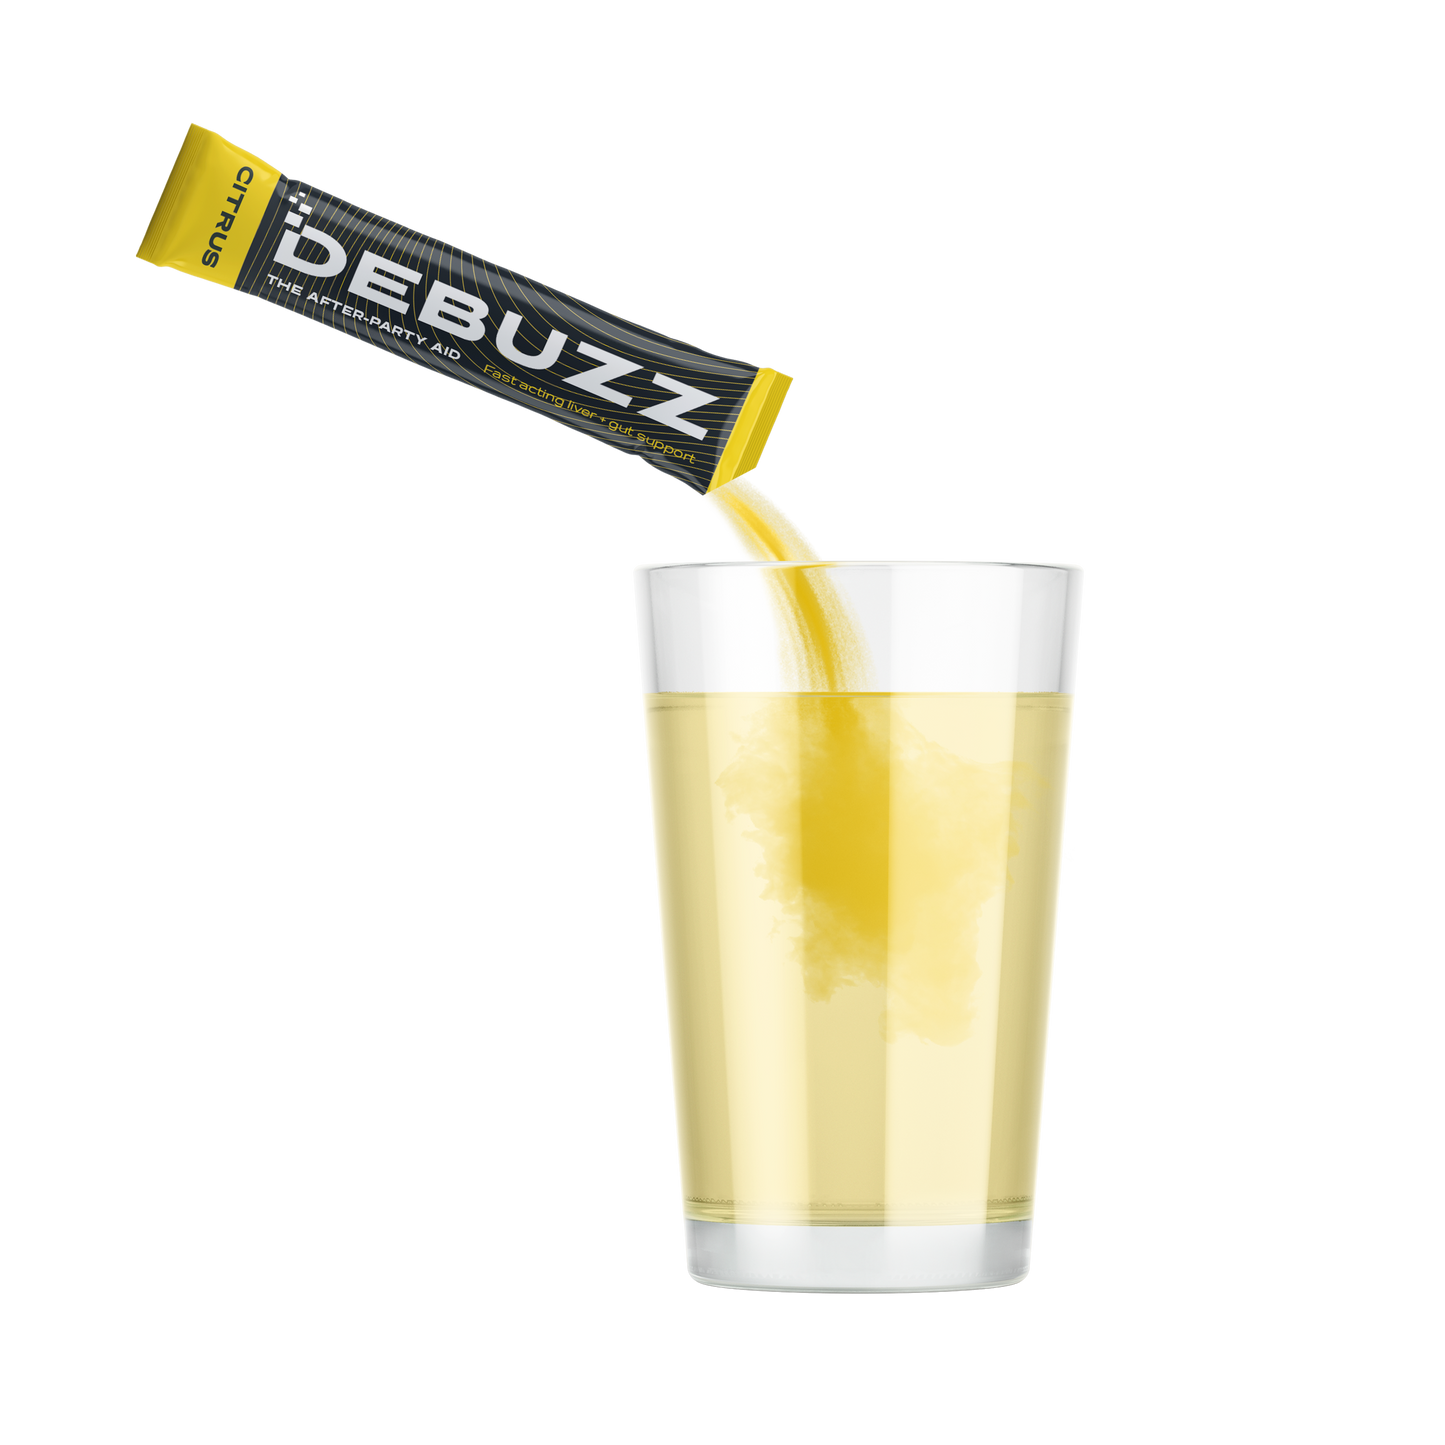 Debuzz Probiotic After Party Aid